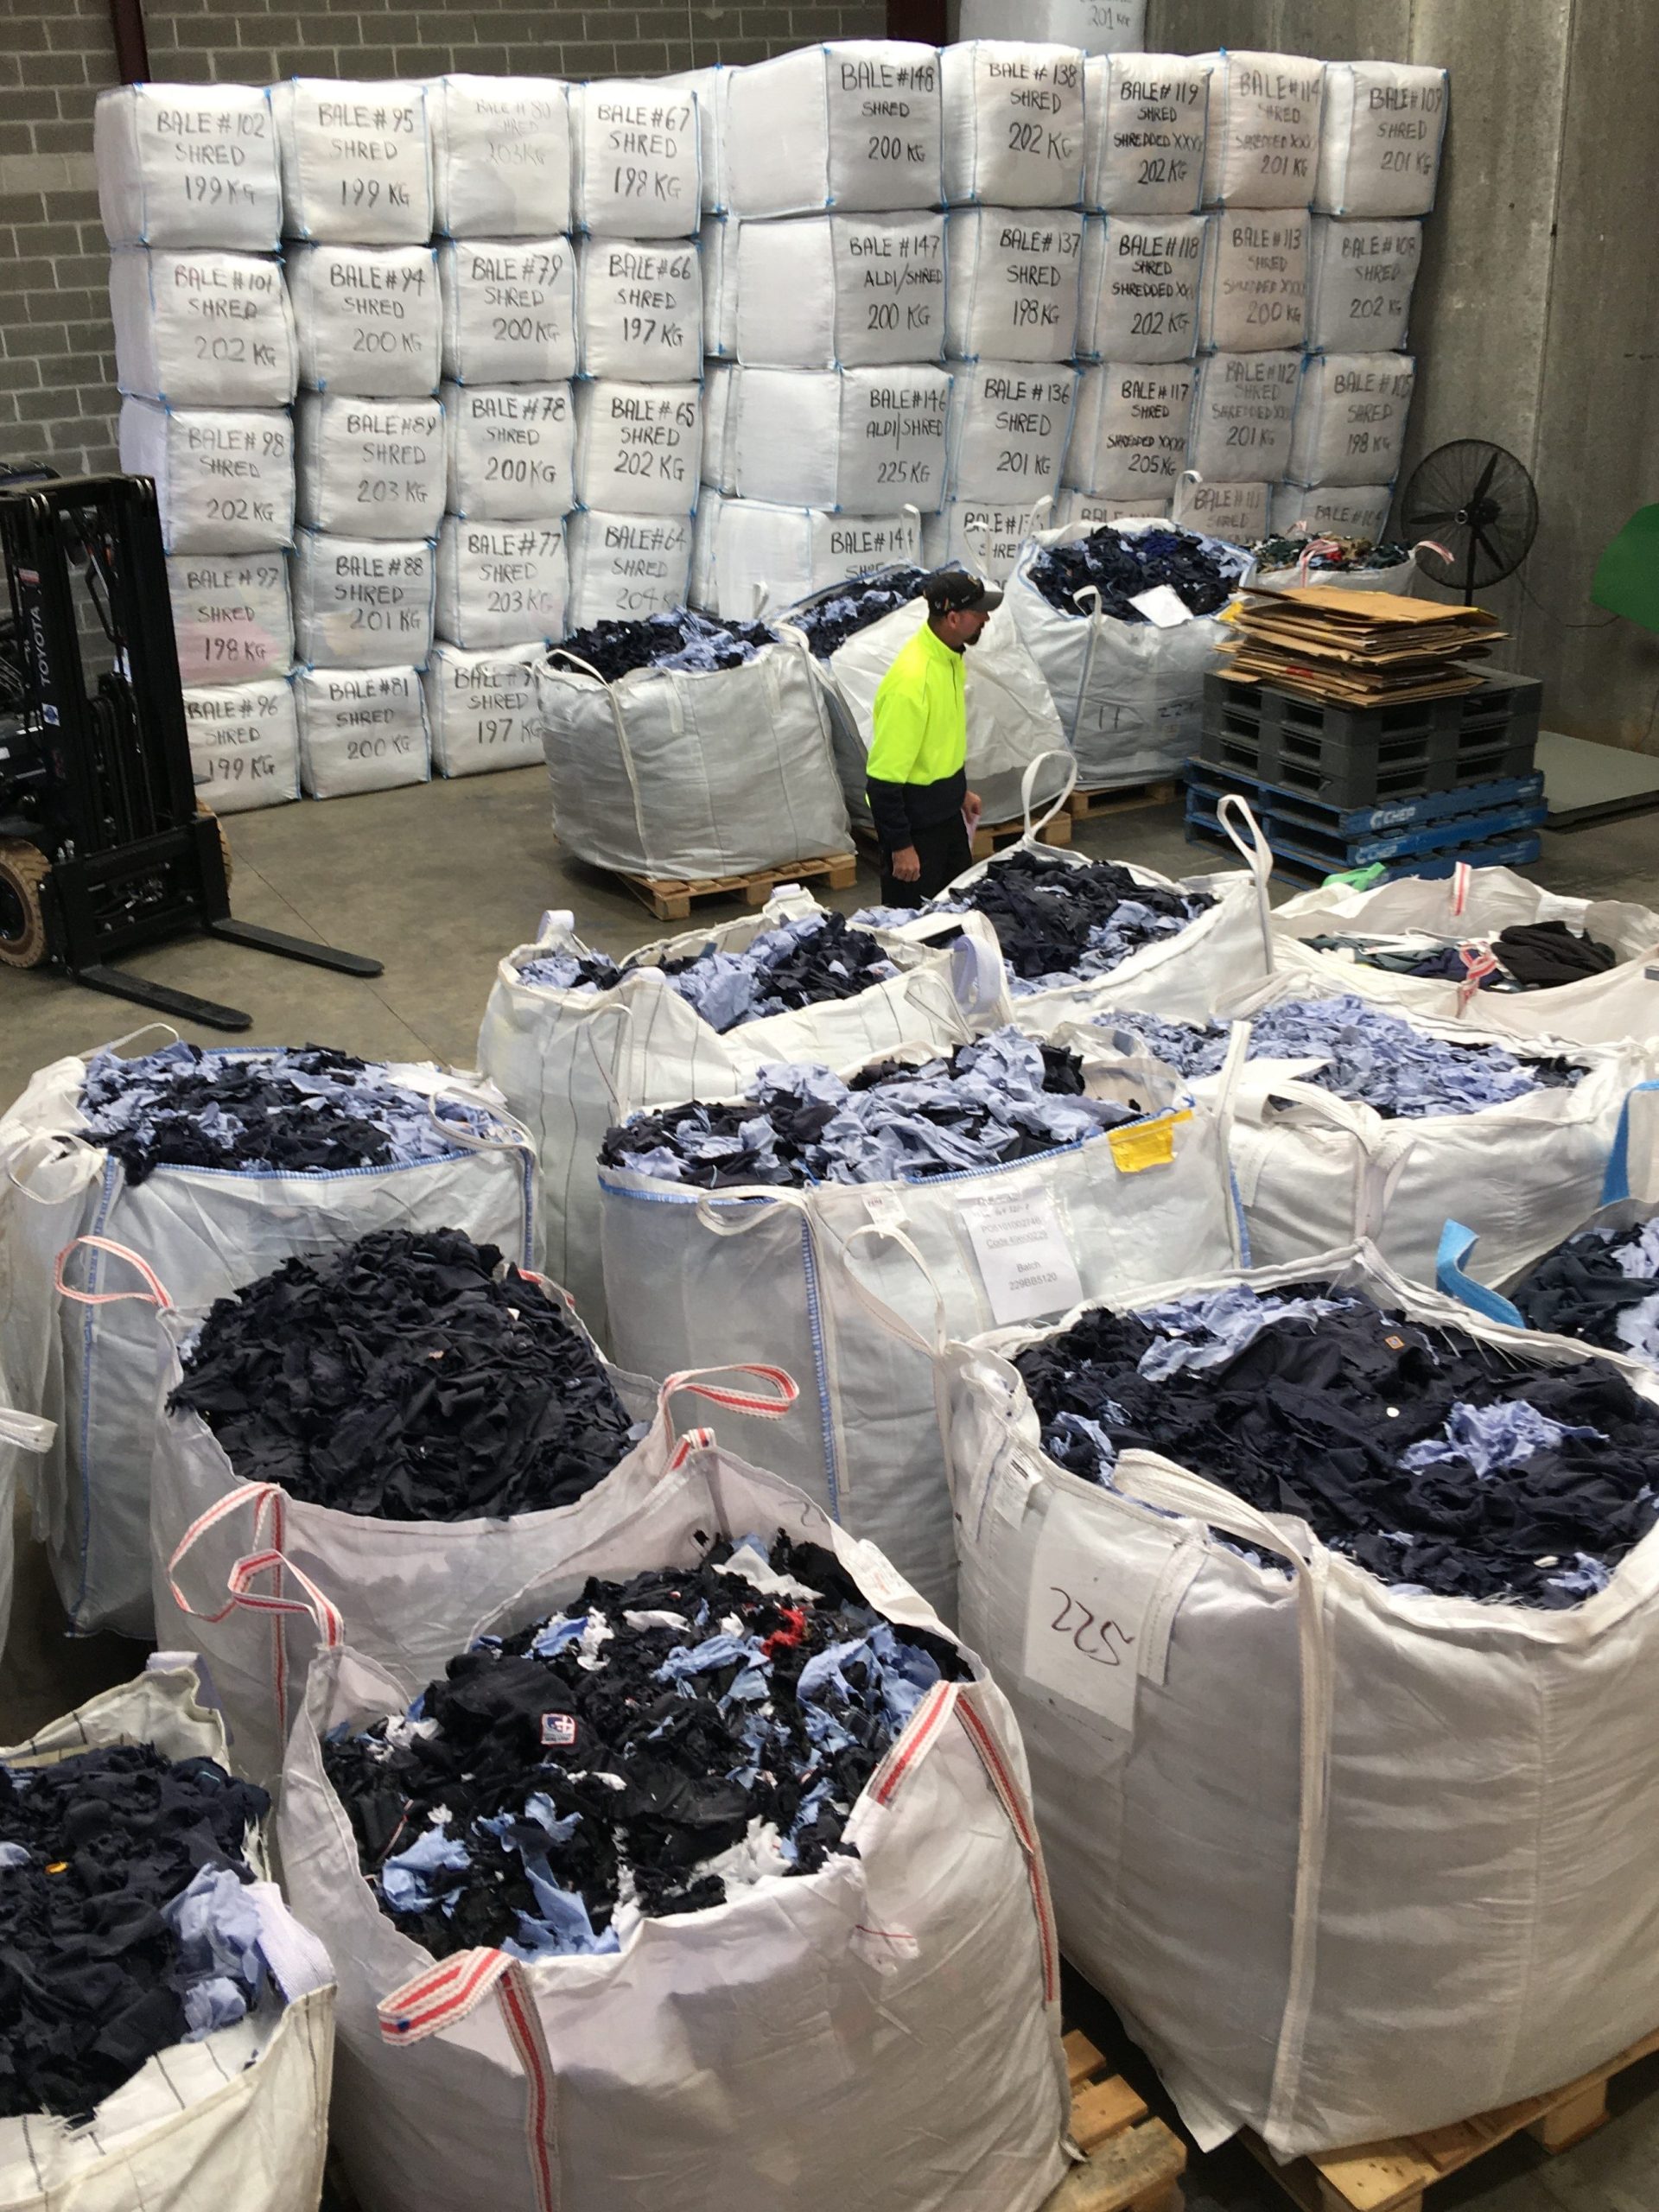 Sustainable Uniforms and Uniform Recycling - an Image of Inside a Textile Recycling Warehouse. Old Uniforms Are Pictured Within Bags Awaiting Recycling. 